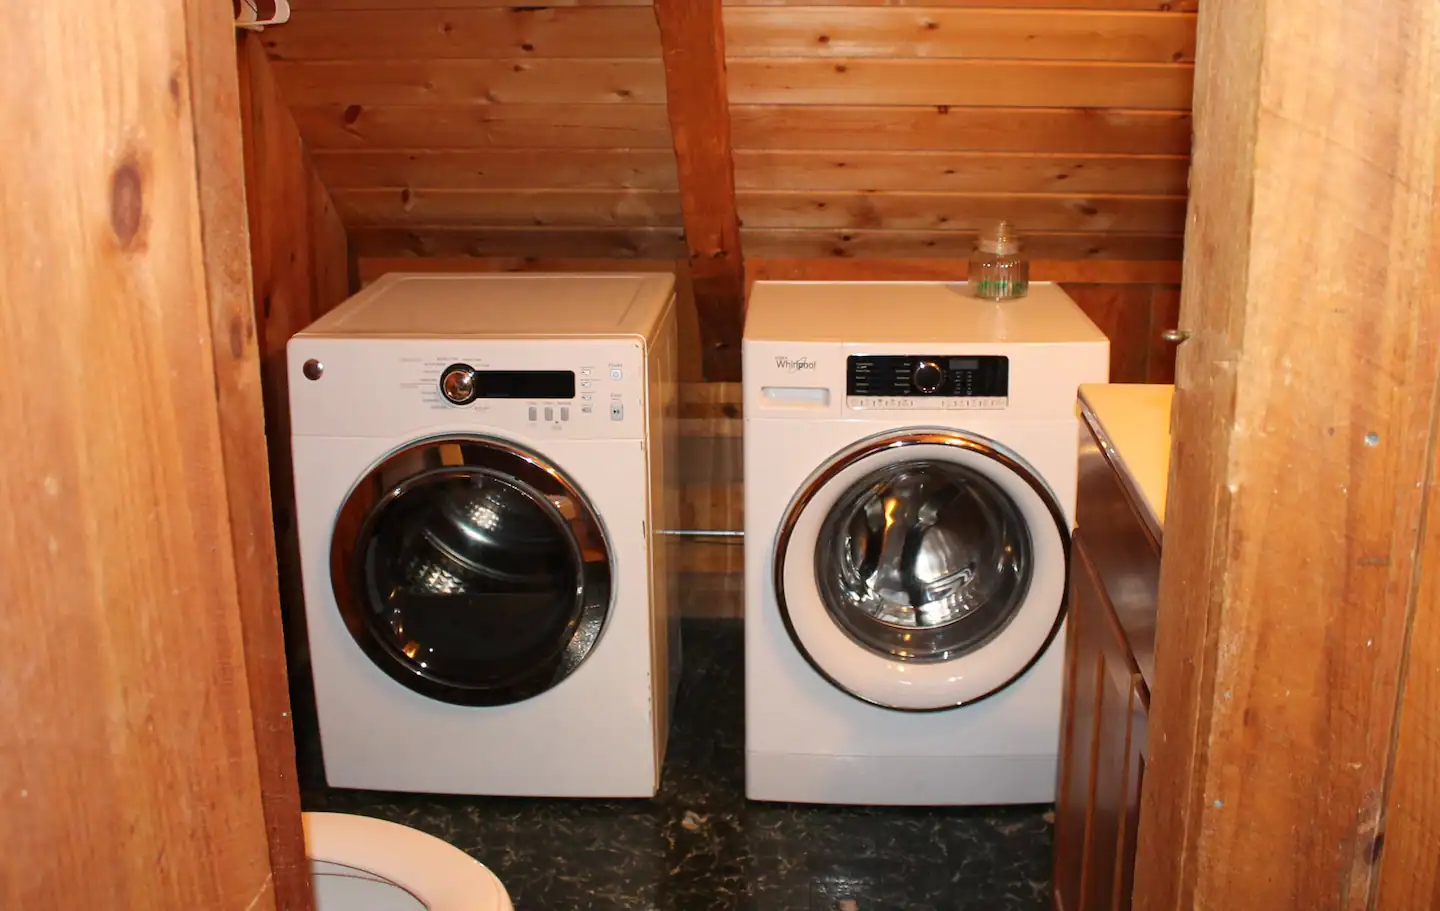 Equipped with a washer and a dryer!